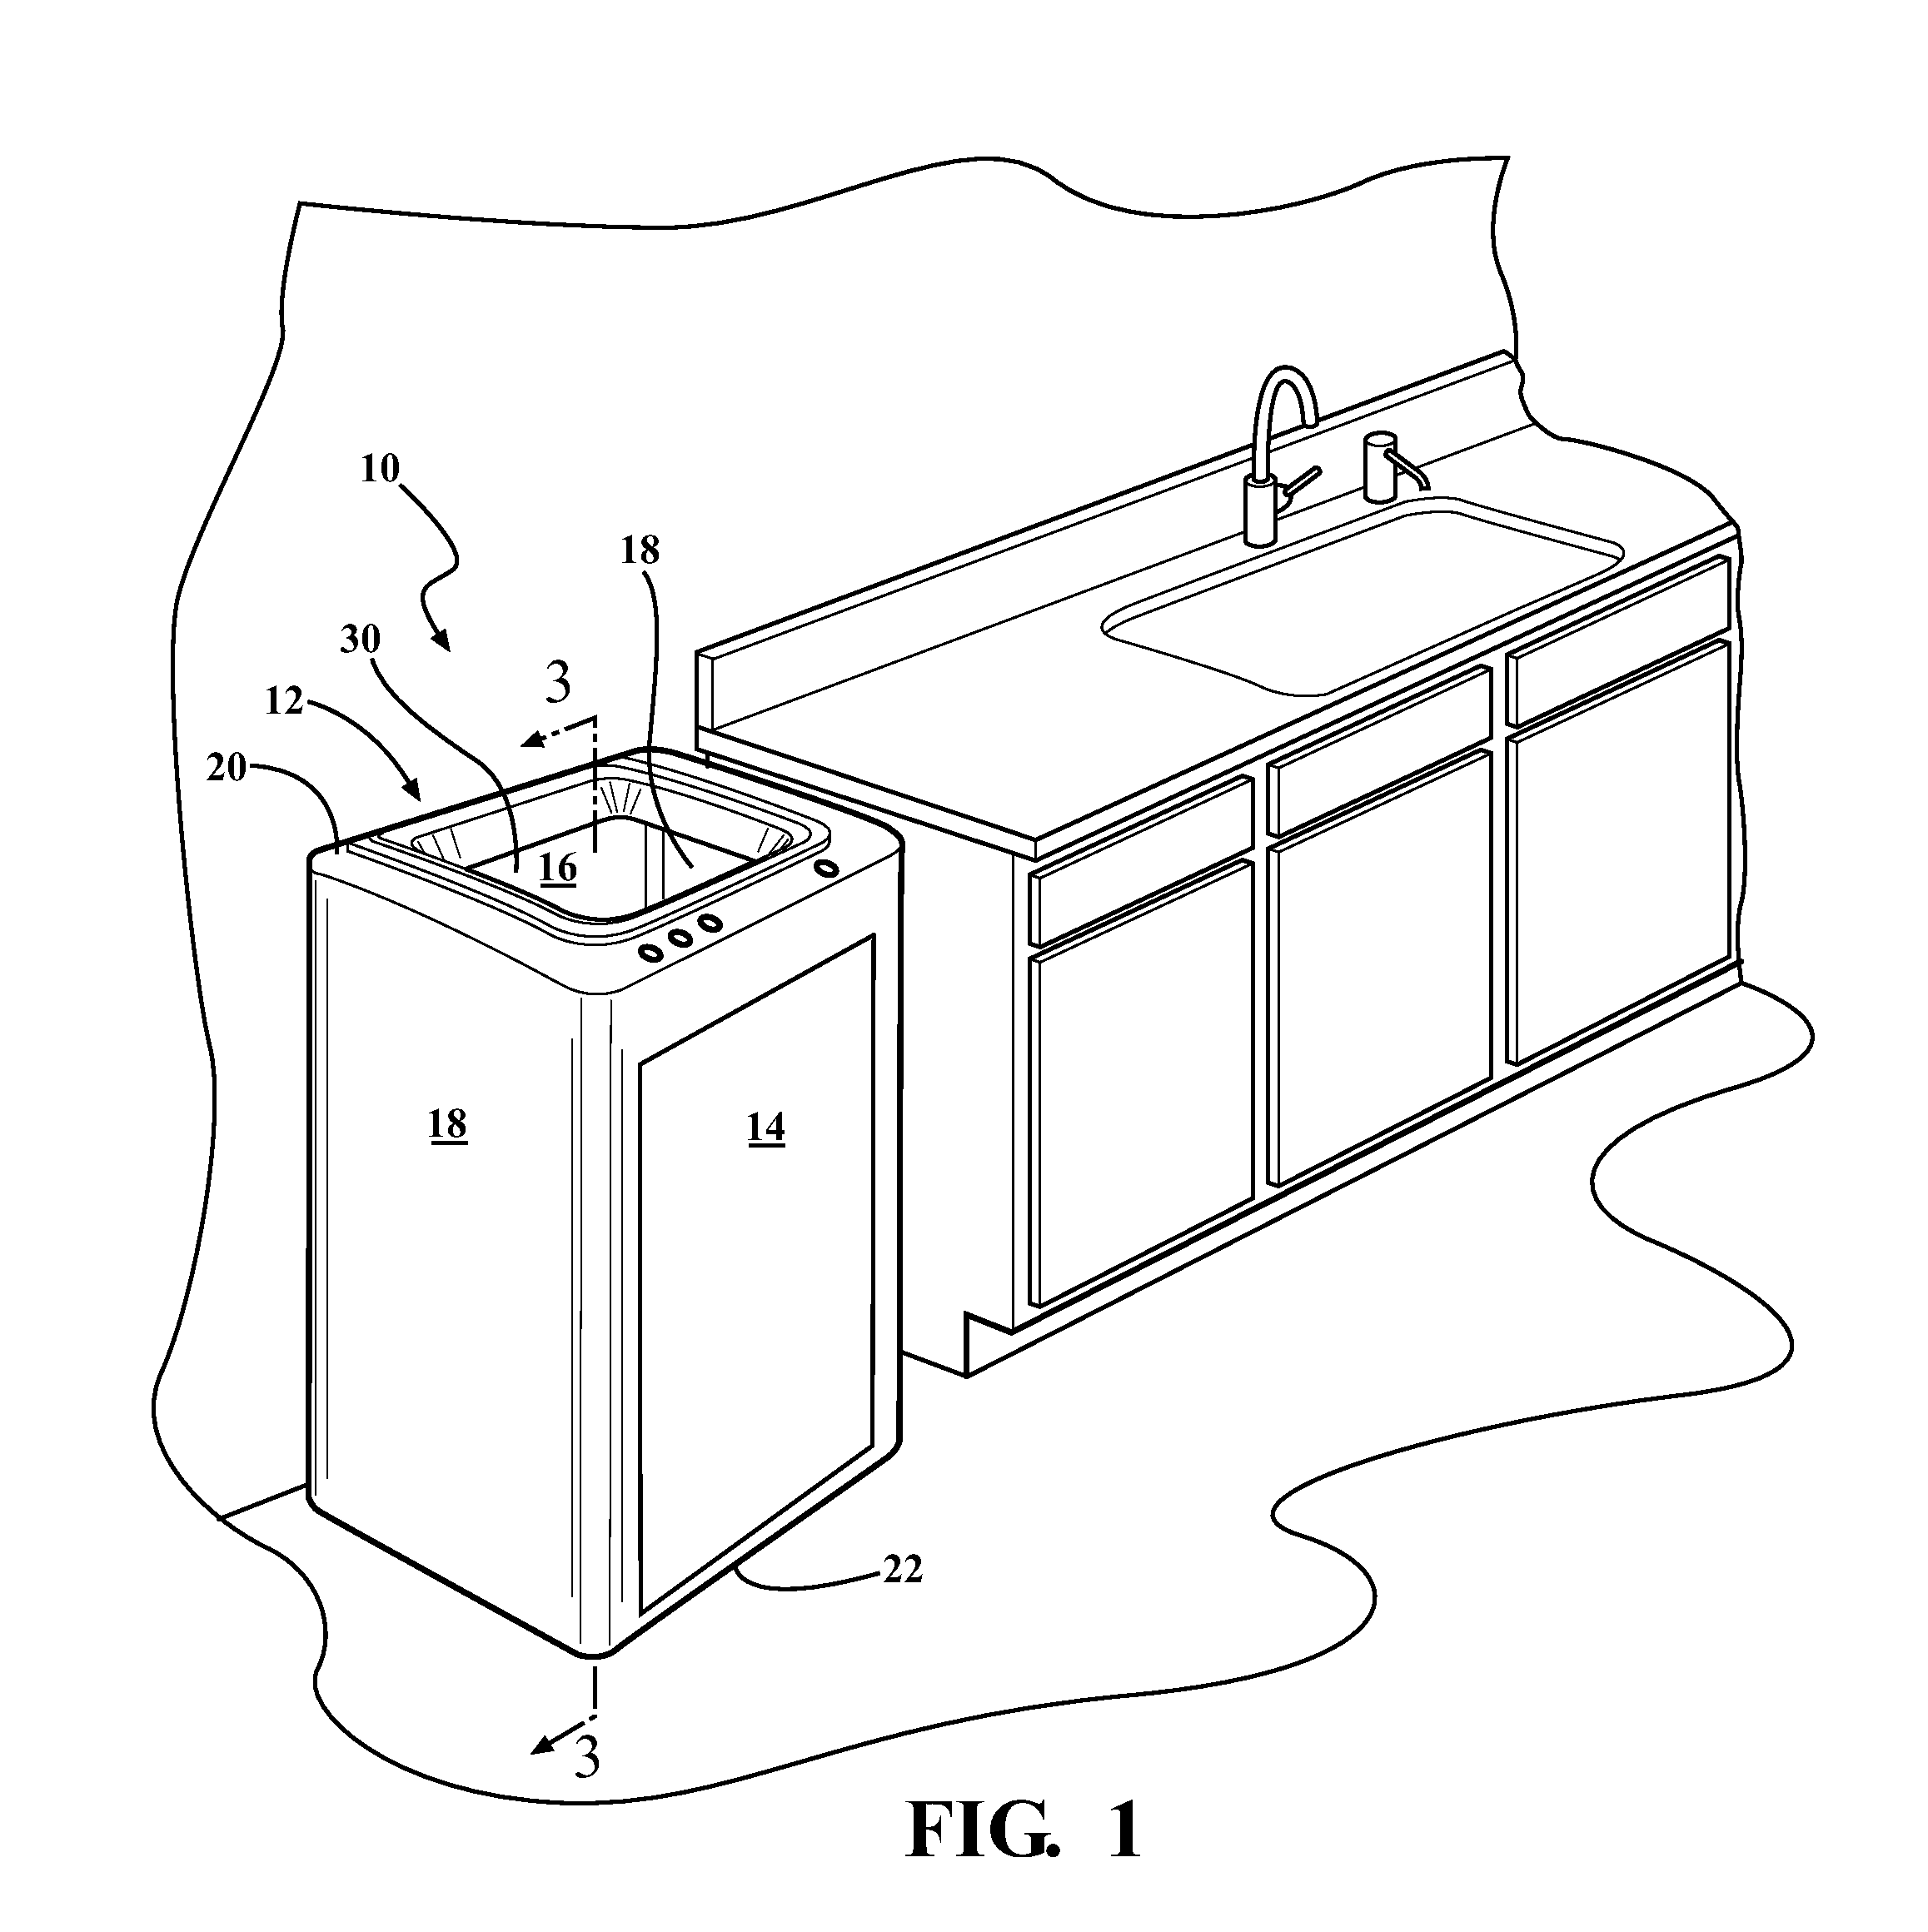 Composting device